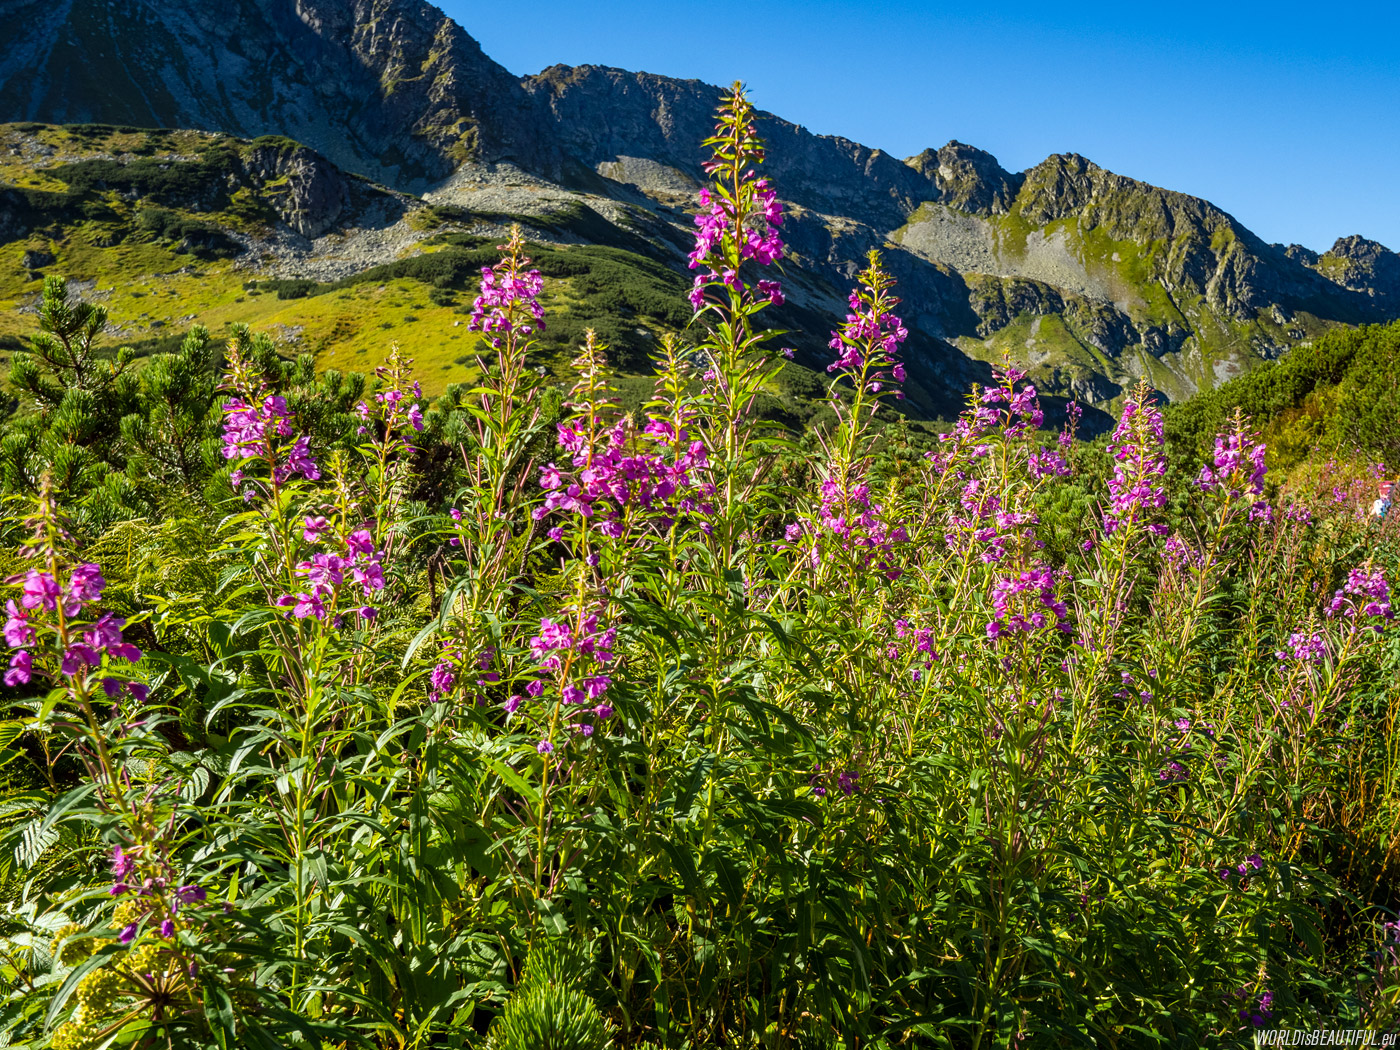 The nature in the High Tatras